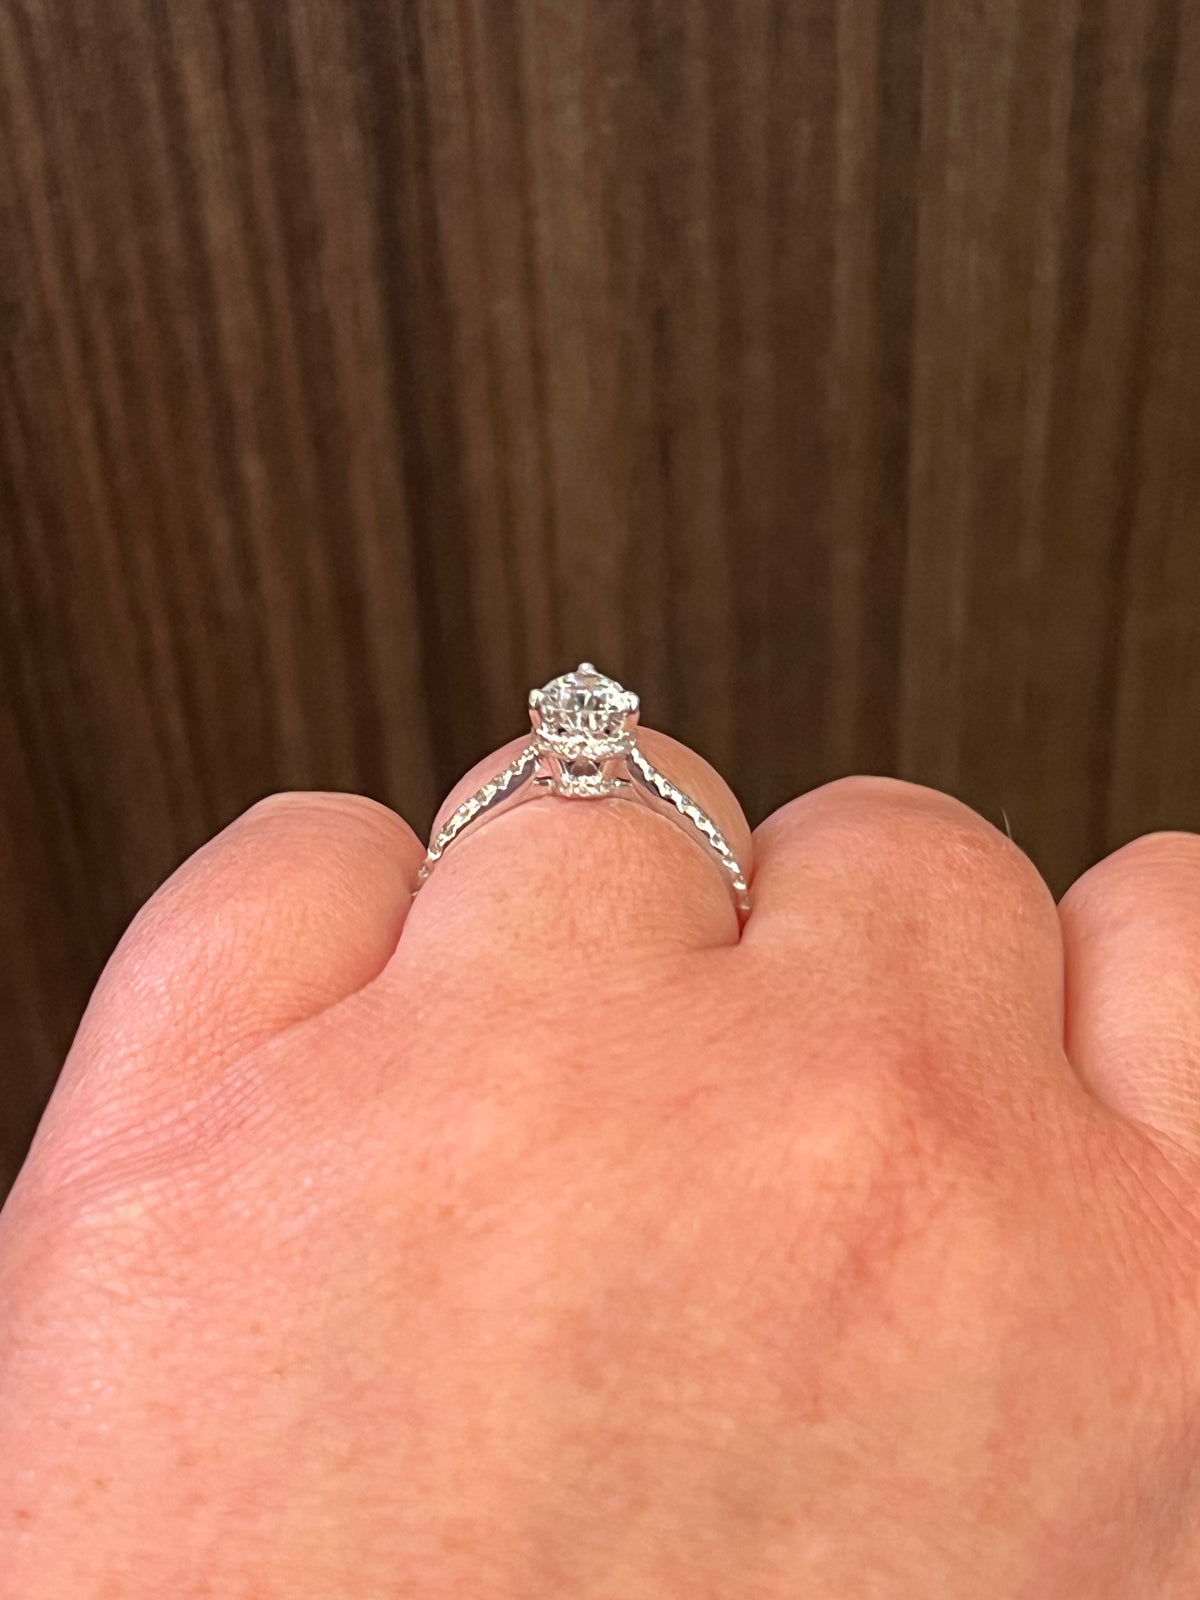 18K White Gold 1.25cttw Pear Shape and Hidden Halo Lab Grown Diamond Engagement Ring